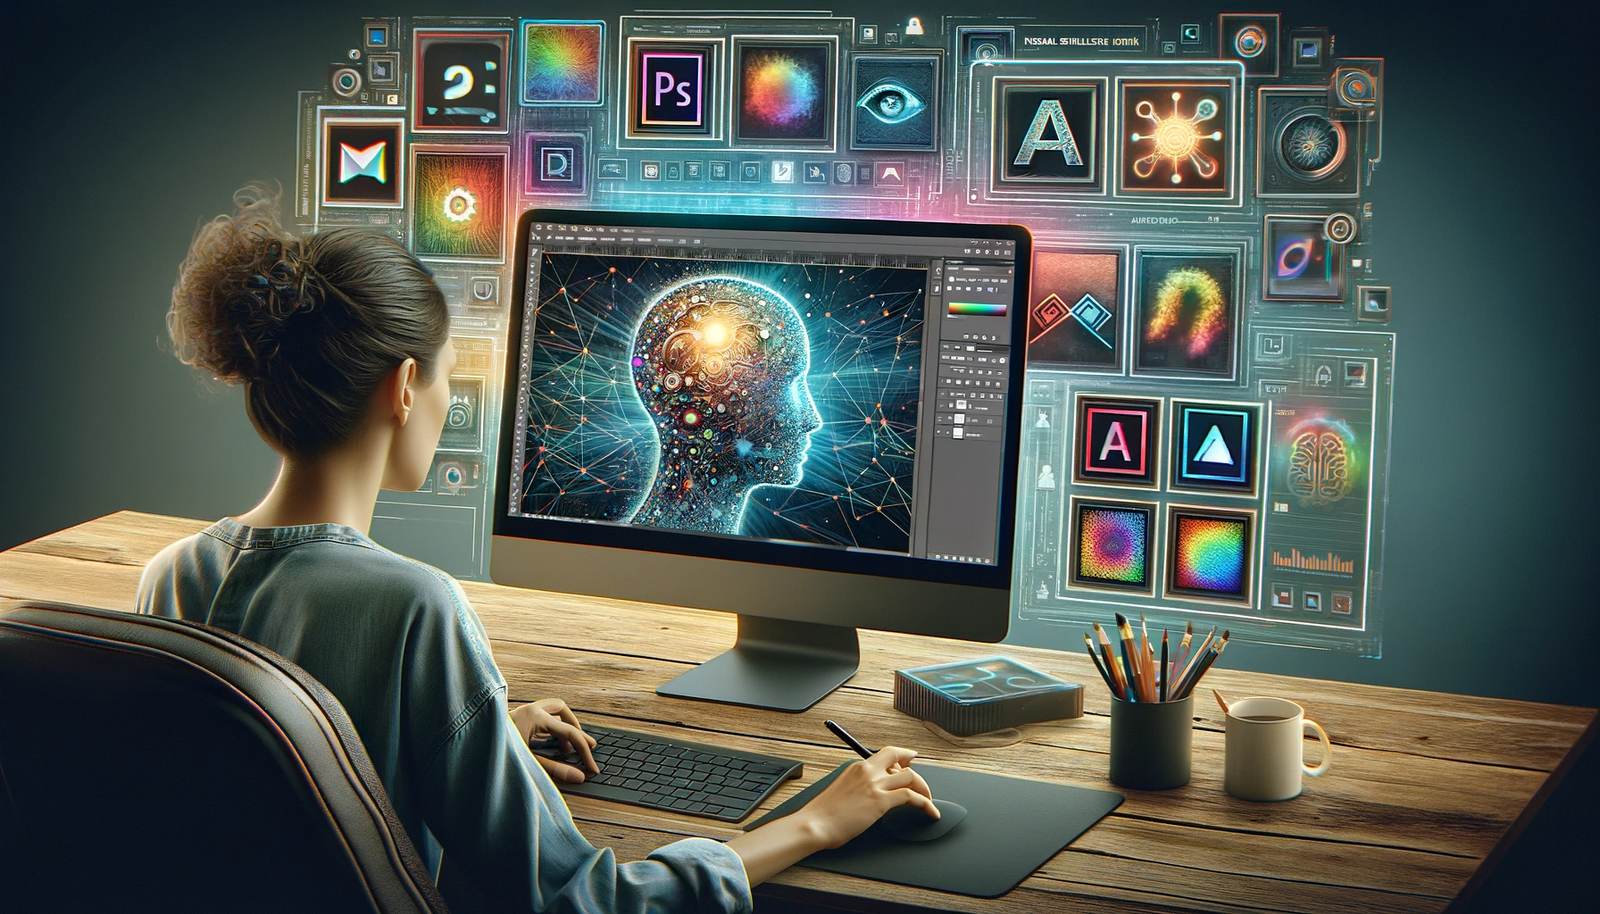 Harnessing the Power of AI in Photoshop